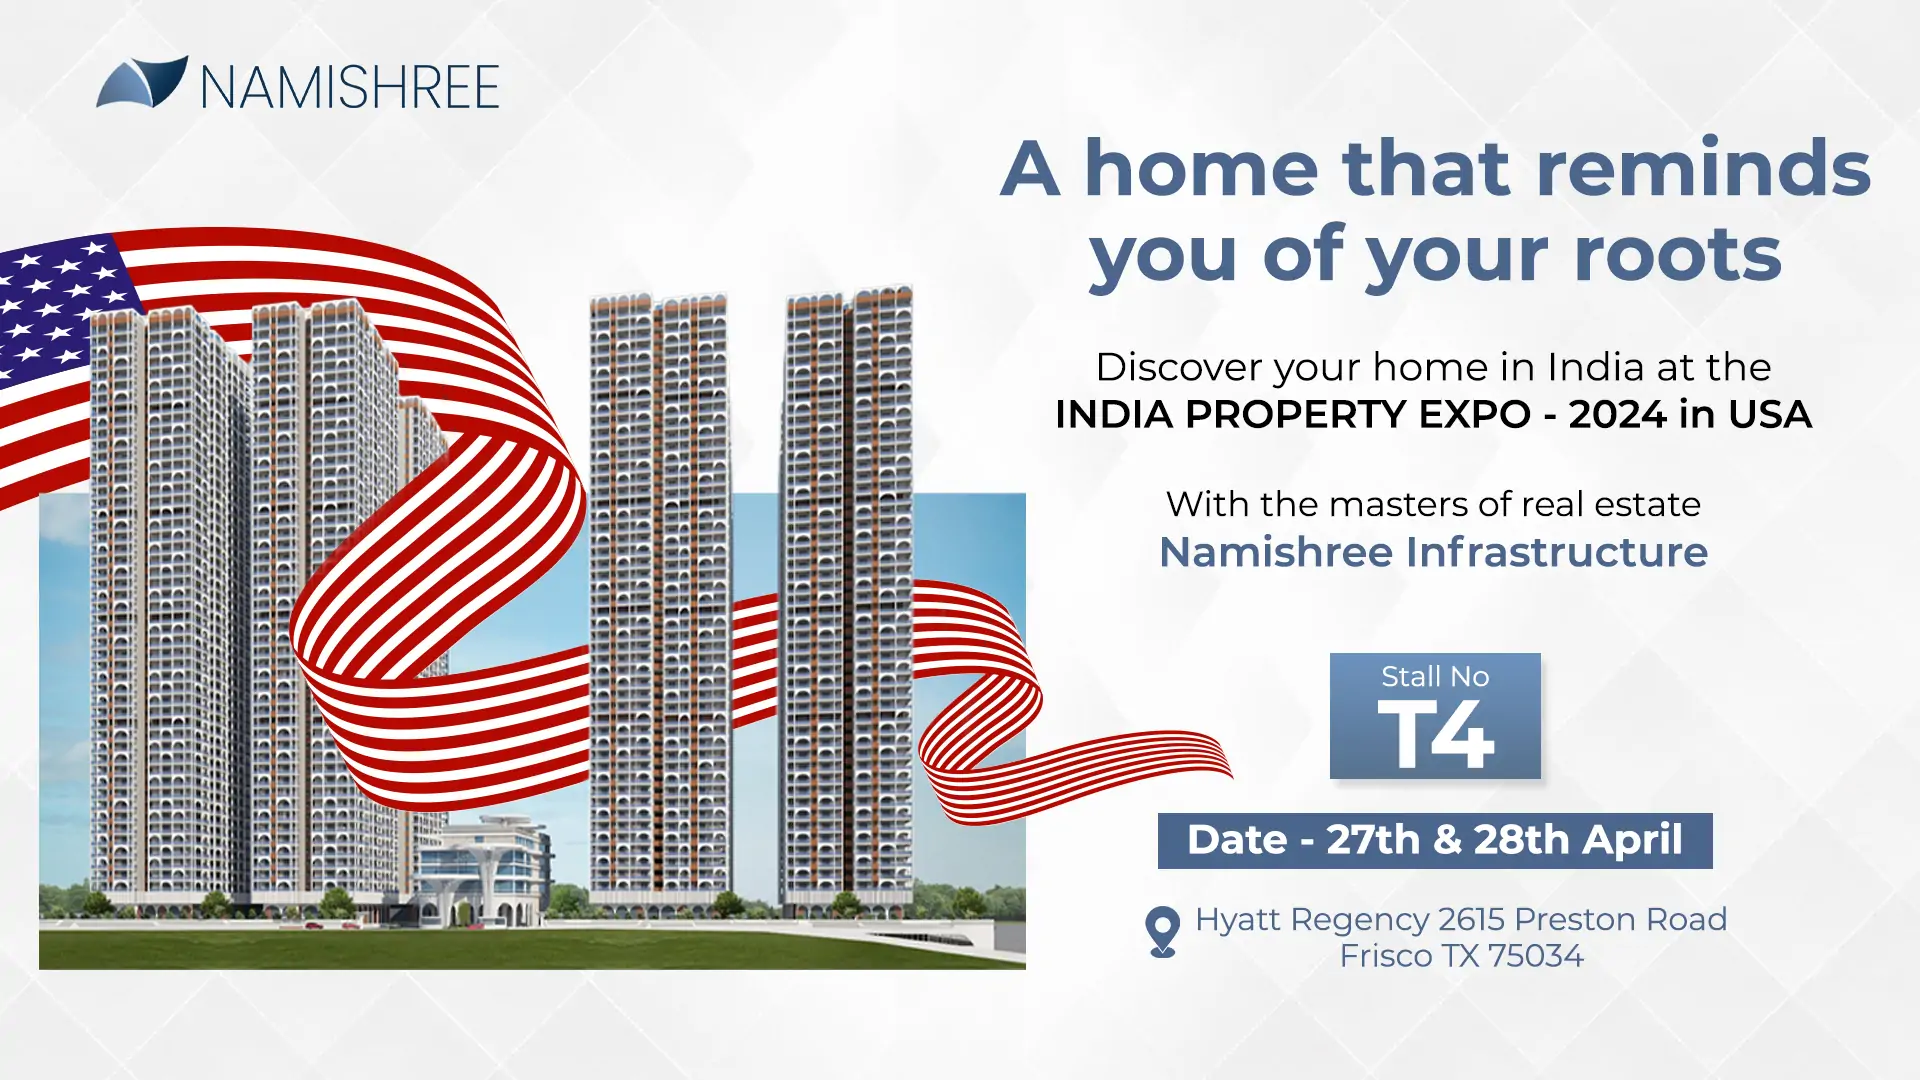 Top Residential Projects in United States through India Property Show: Namishree